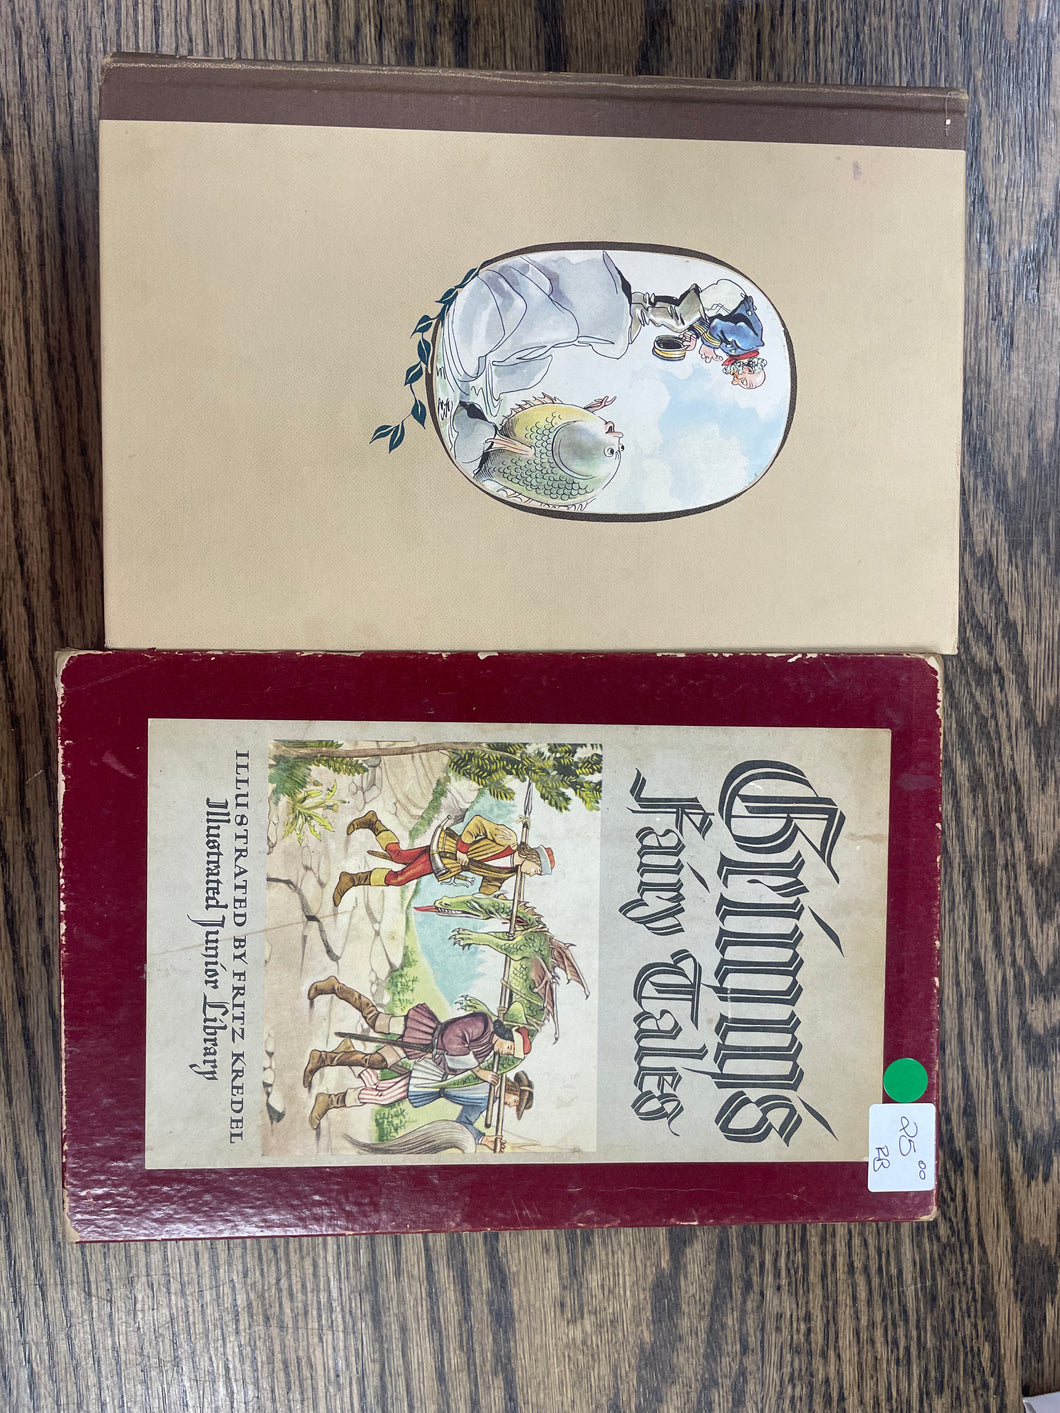 Grimms' Fairy Tales by Brothers Grimm. Translated by Mrs. E. V. Lucas, Lucy Grane and Marian Edwards.